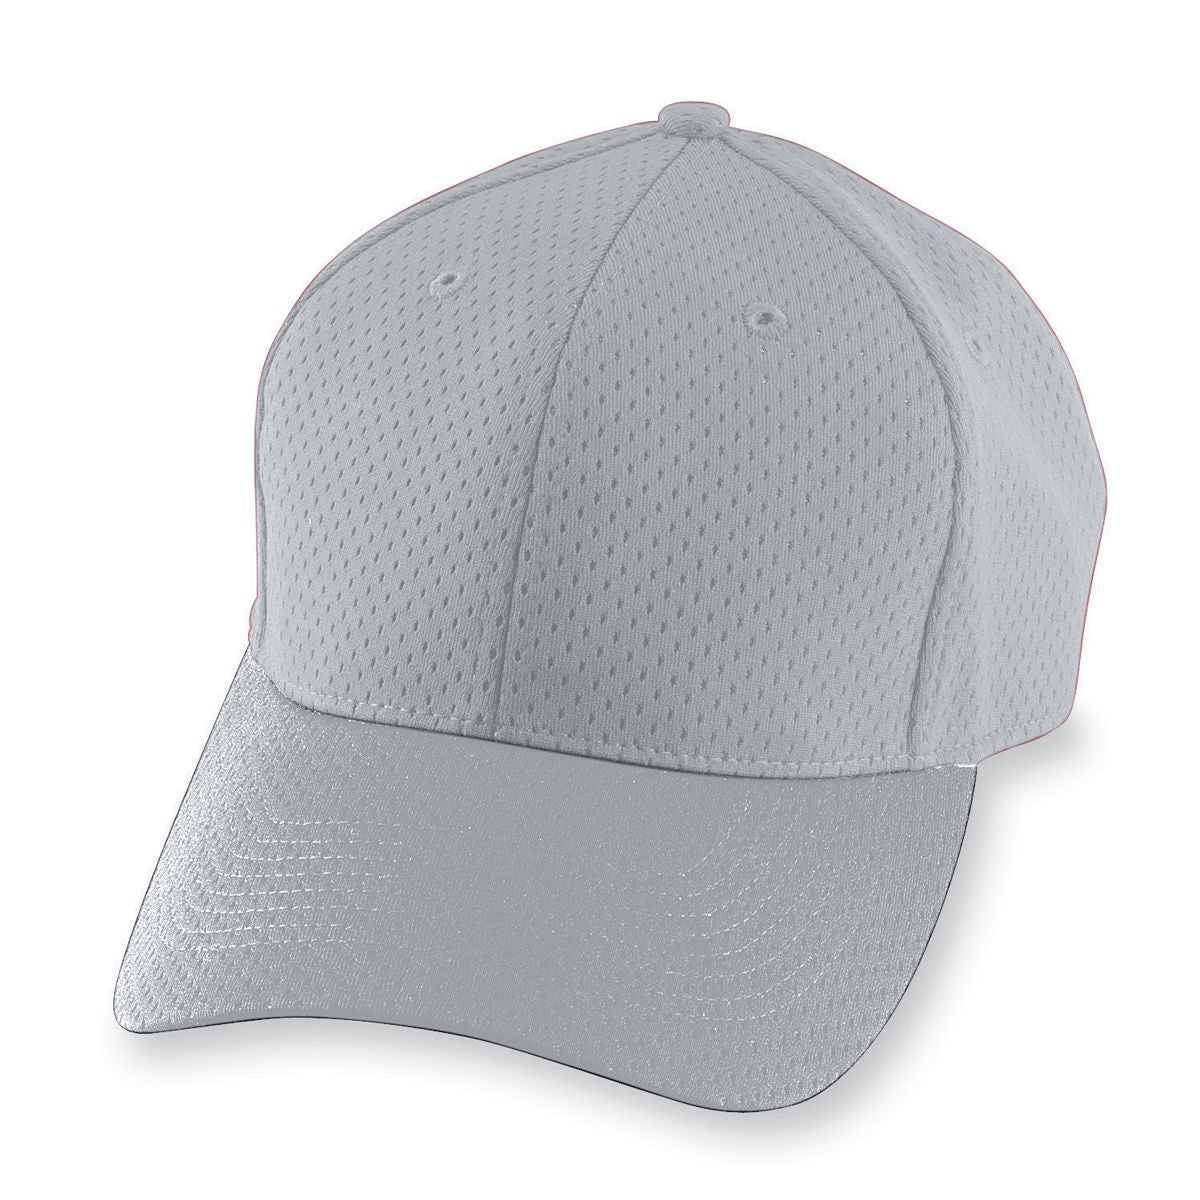 Youth Athletic Mesh Cap - 6236